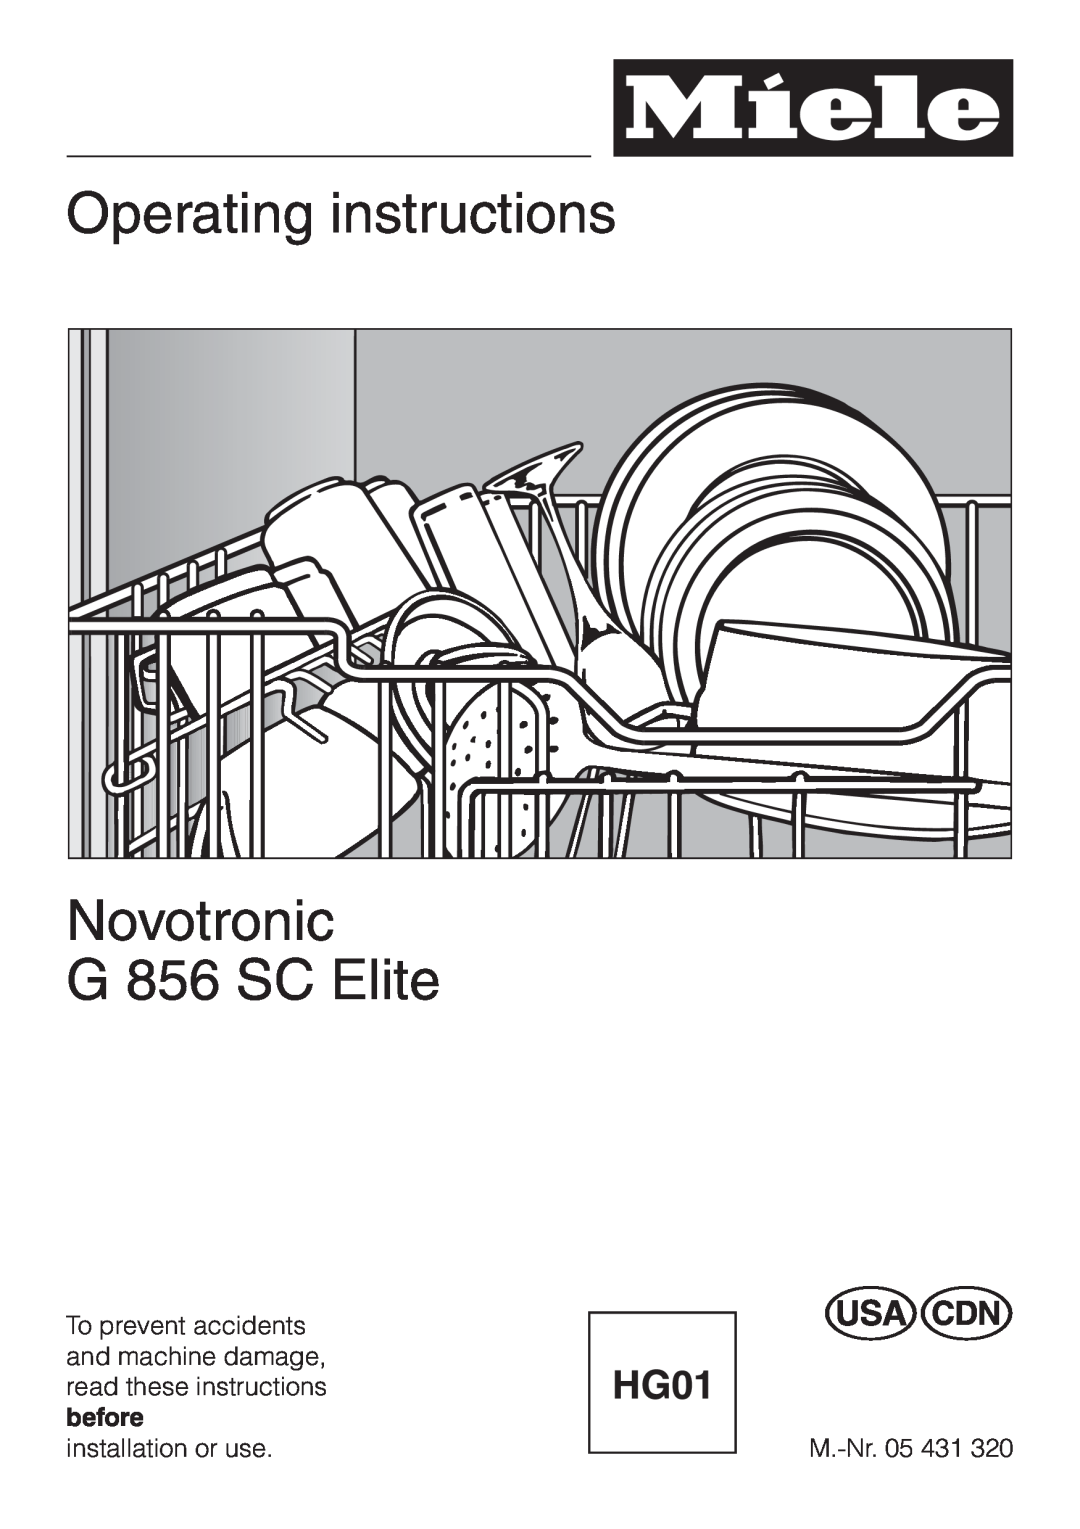 Miele G 856 SC ELITE operating instructions Operating instructions, Novotronic G 856 SC Elite 